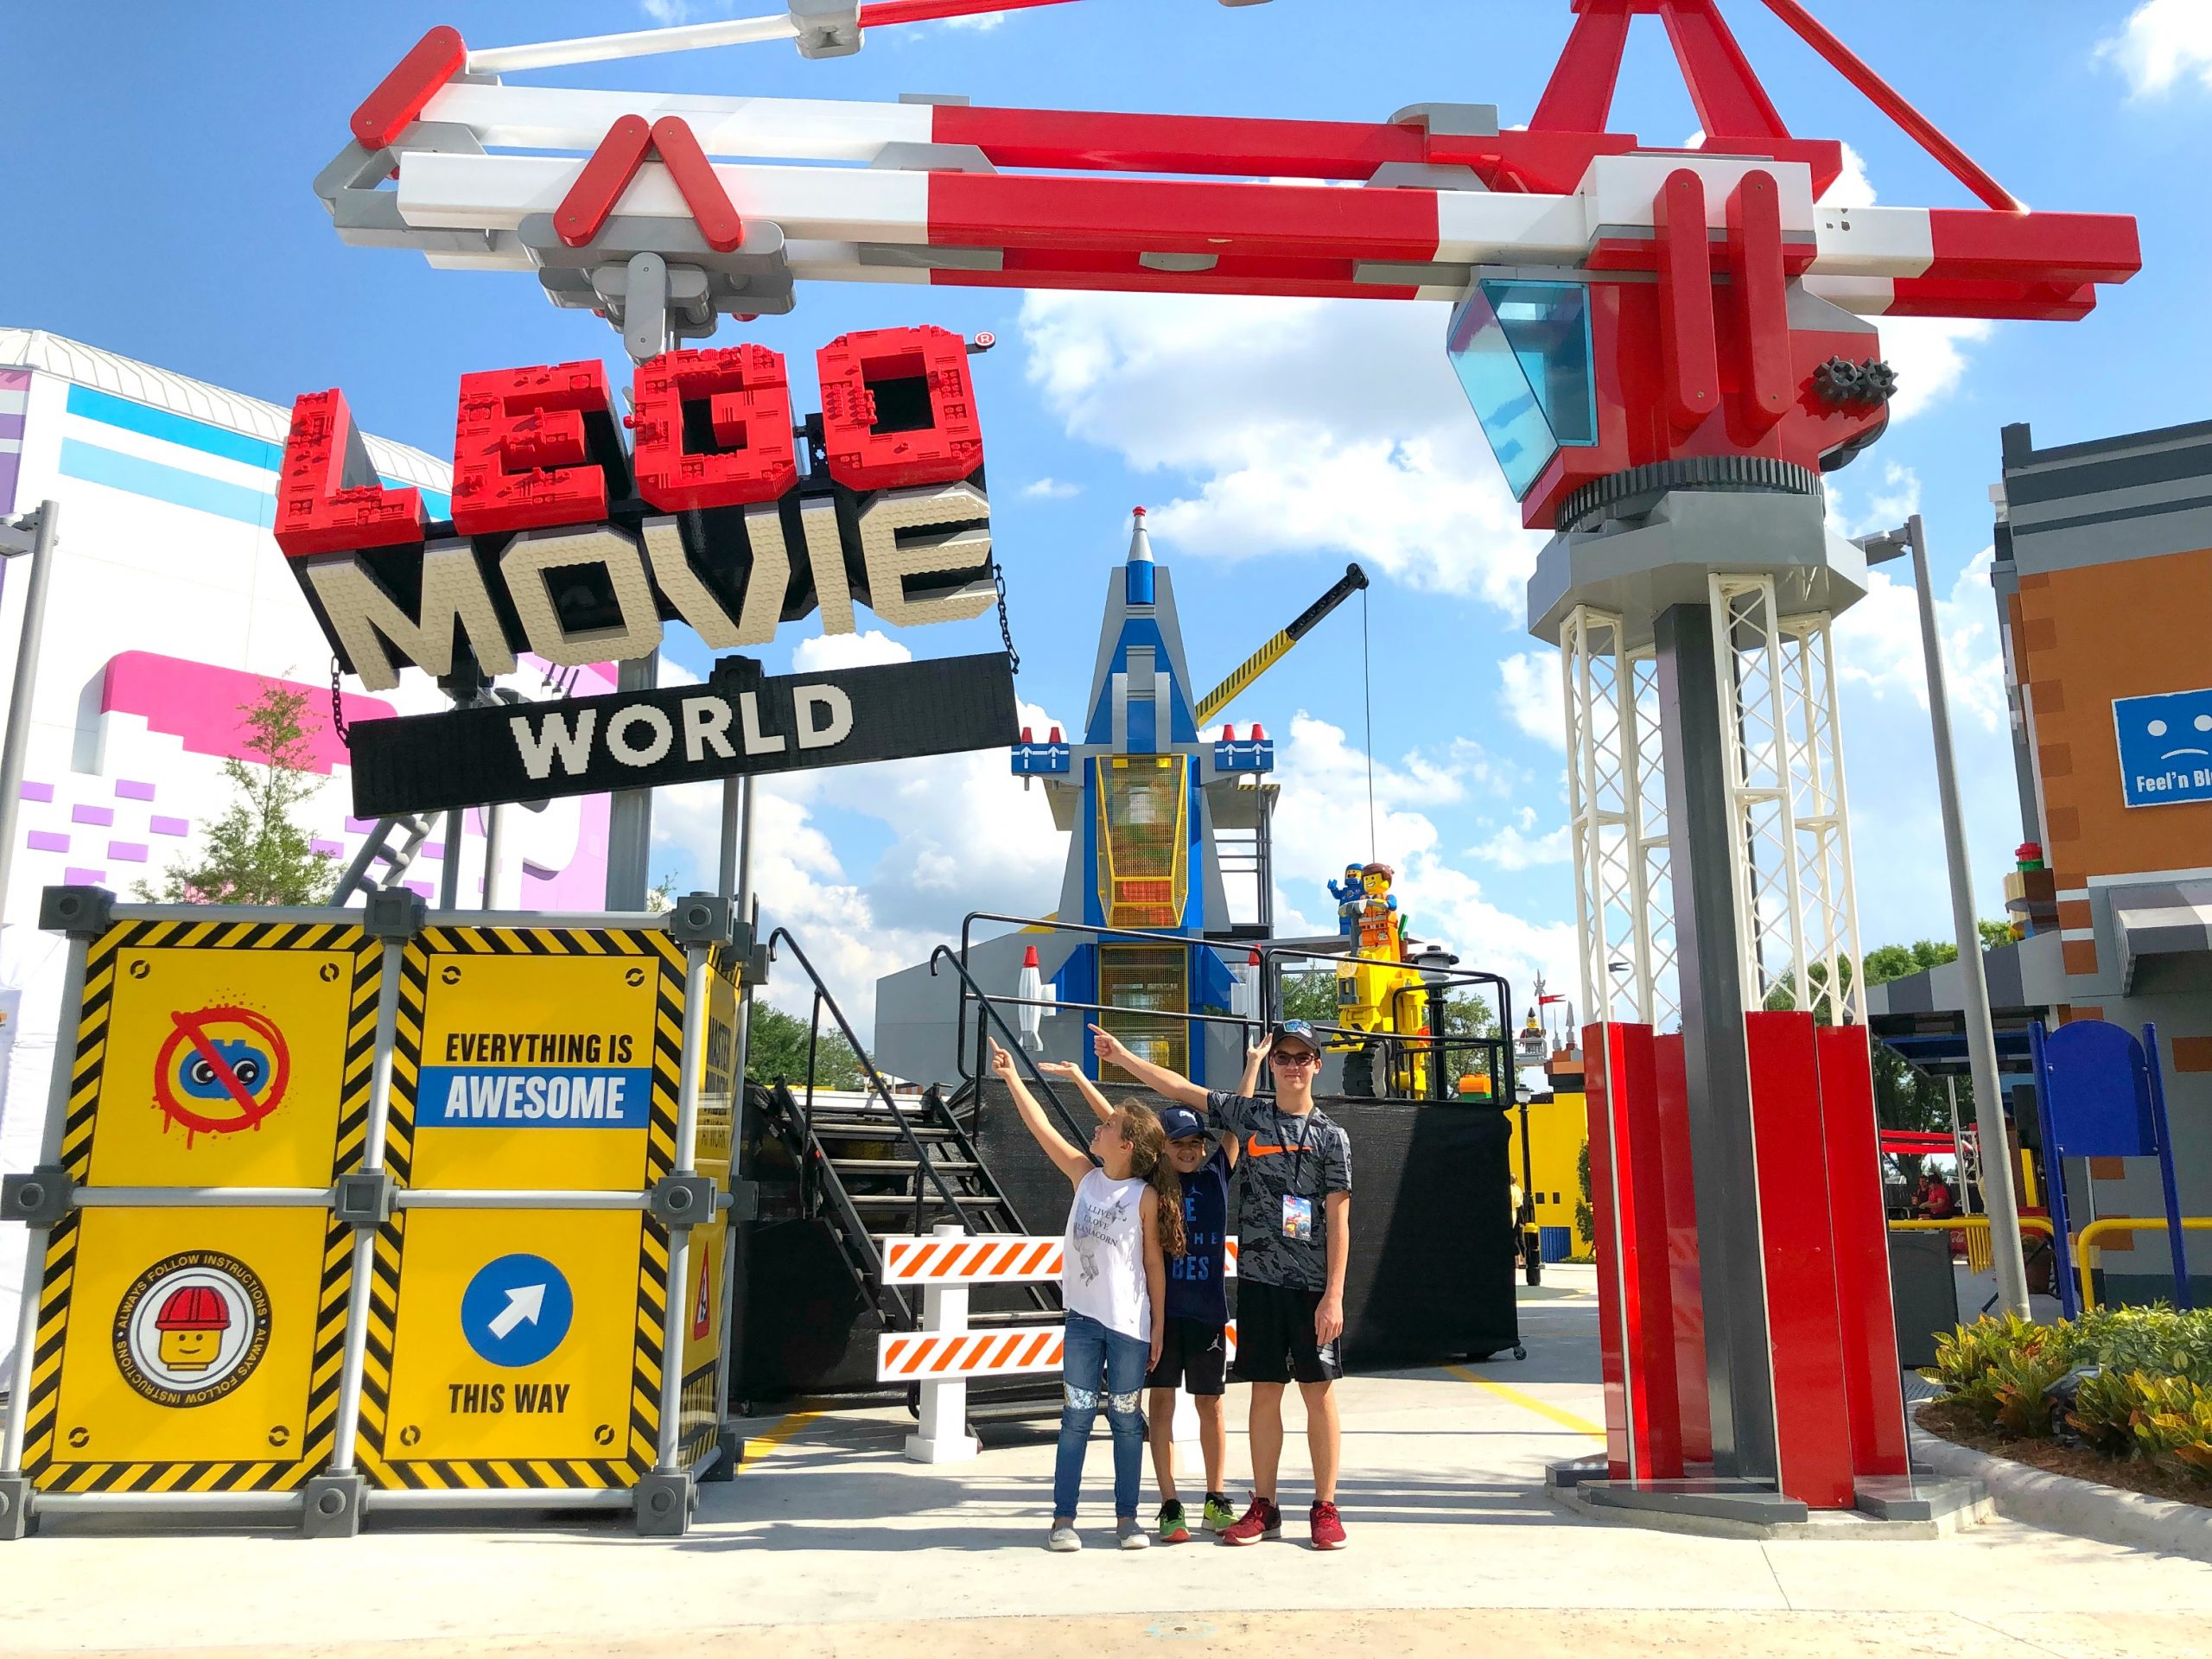 The LEGO Movie World at LEGOLAND Florida is Now OPEN!